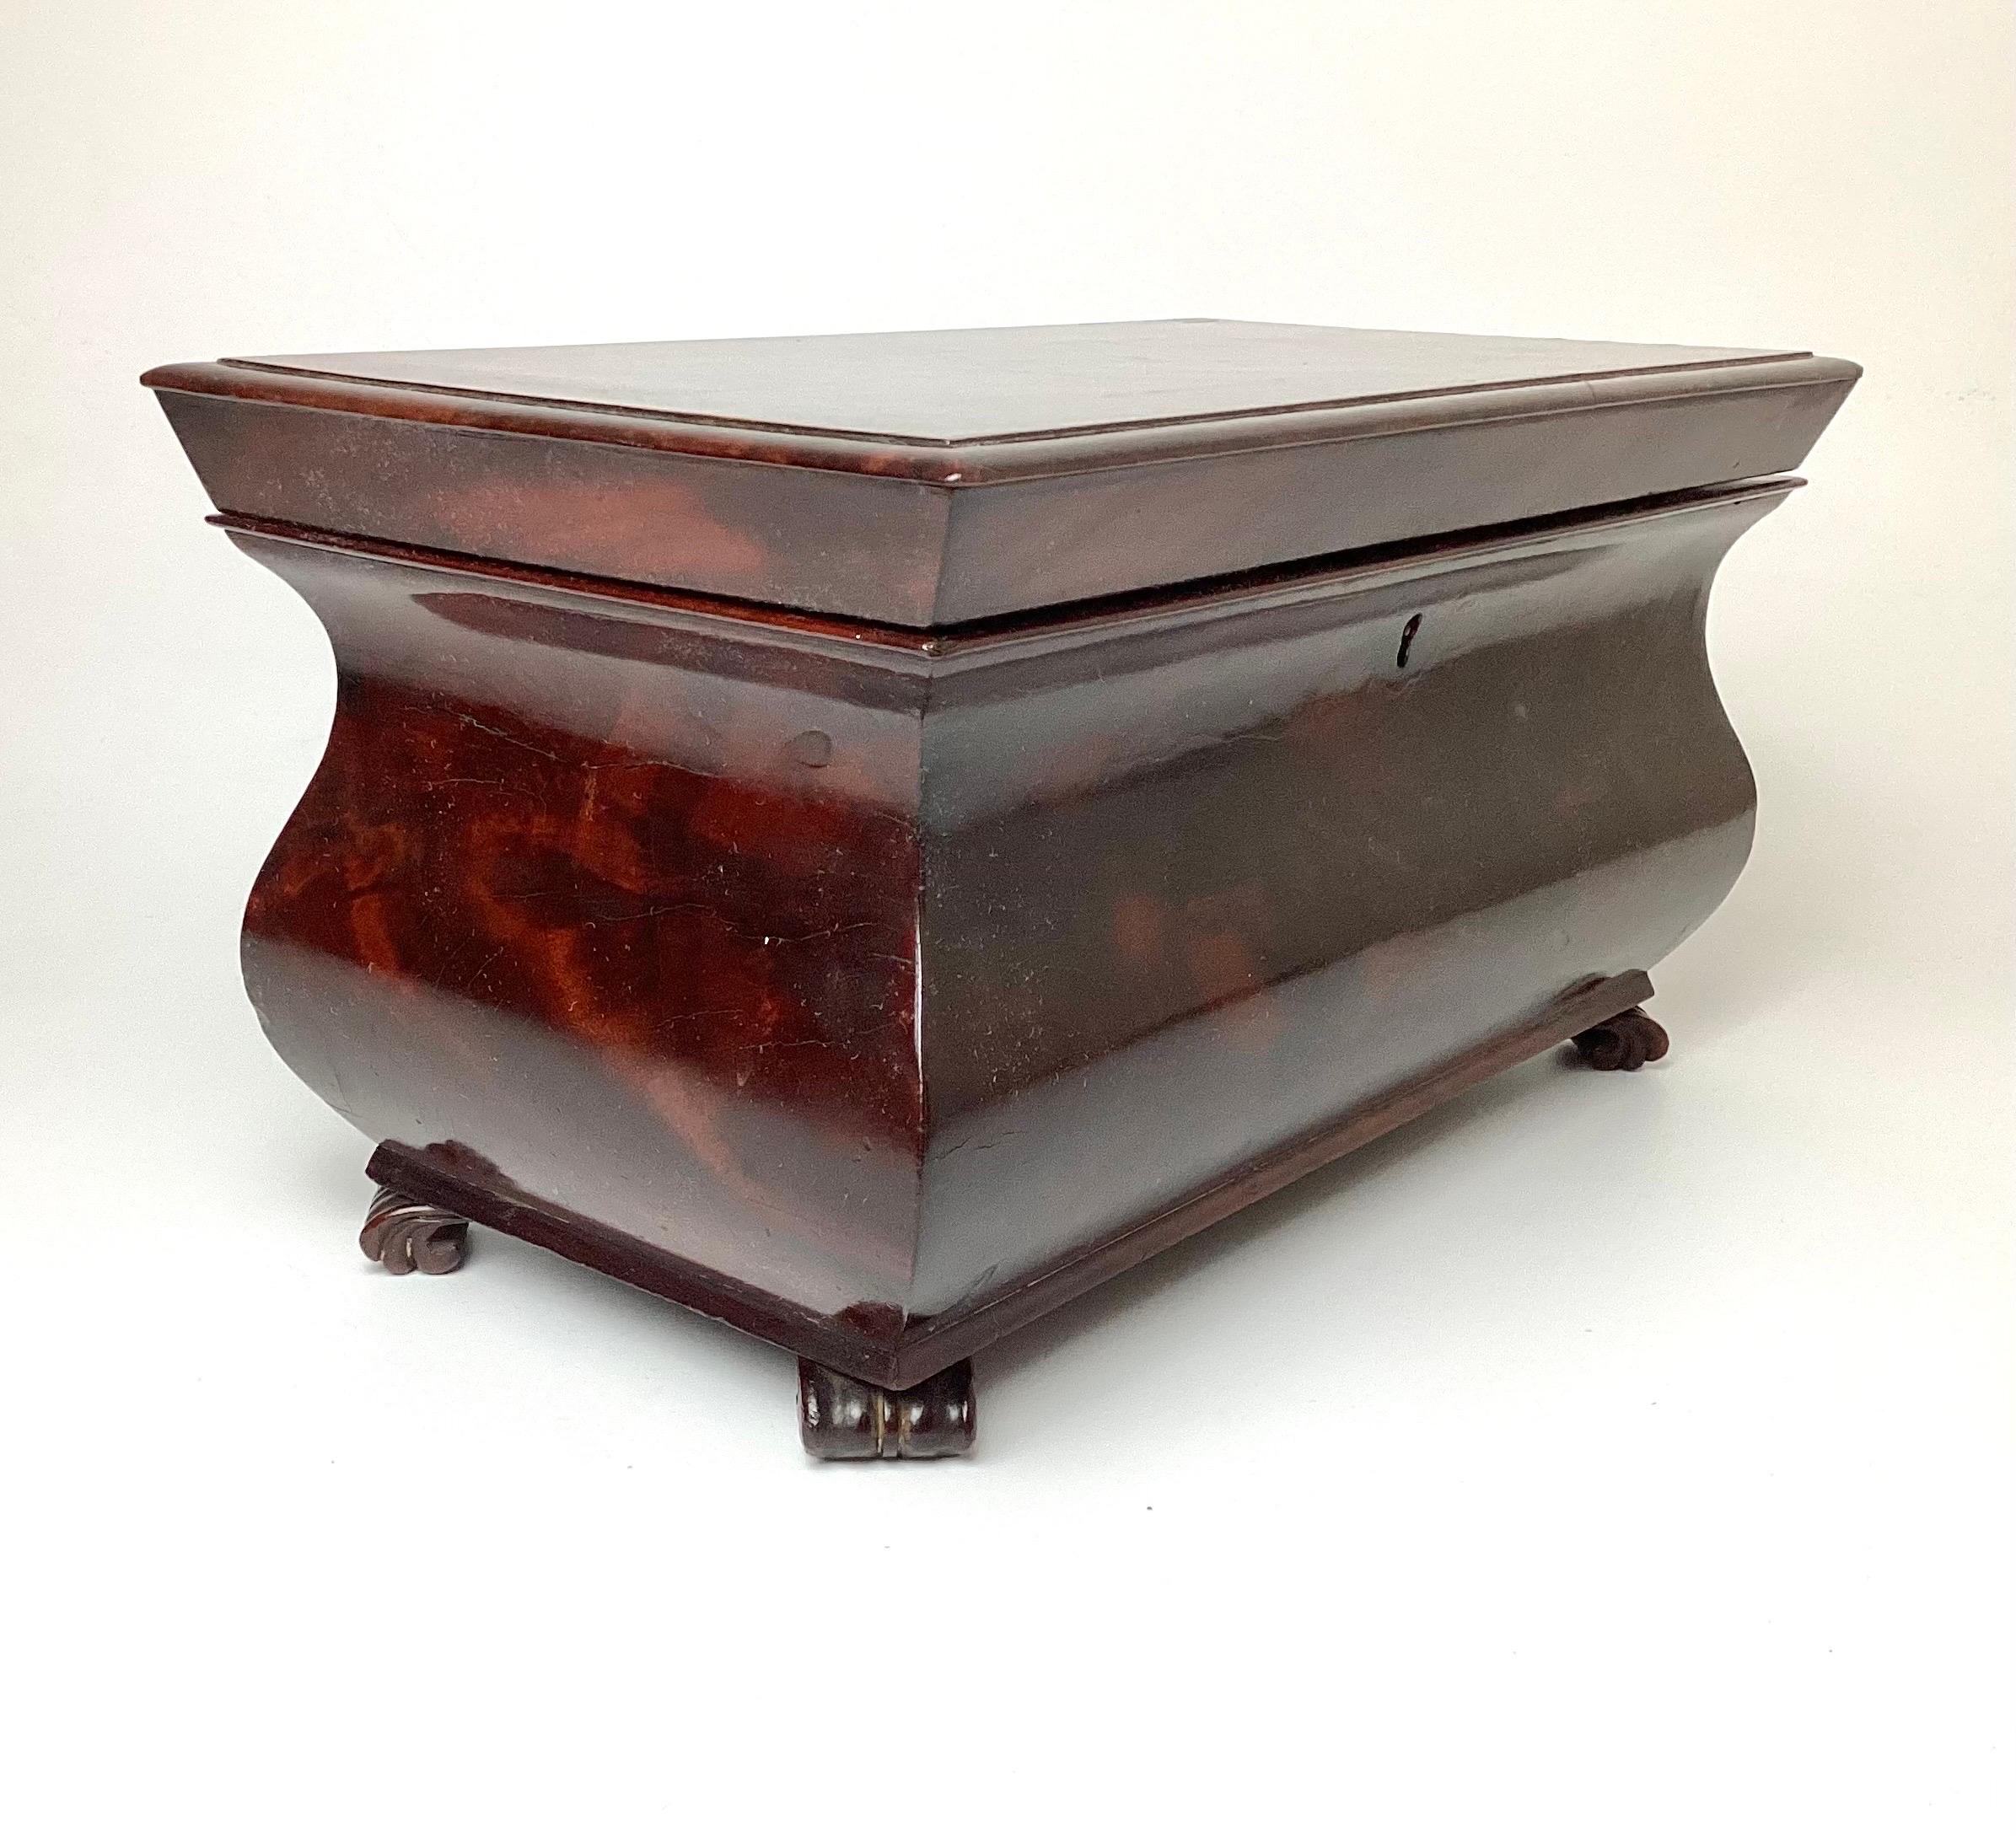 A very fine regency period mahogany tea caddy. Wonderful early surface that is rich with patina. The box expertly conceived and executed. The lid opens to reveal two lidded compartments, each of which is its own self-contained mahogany box. These